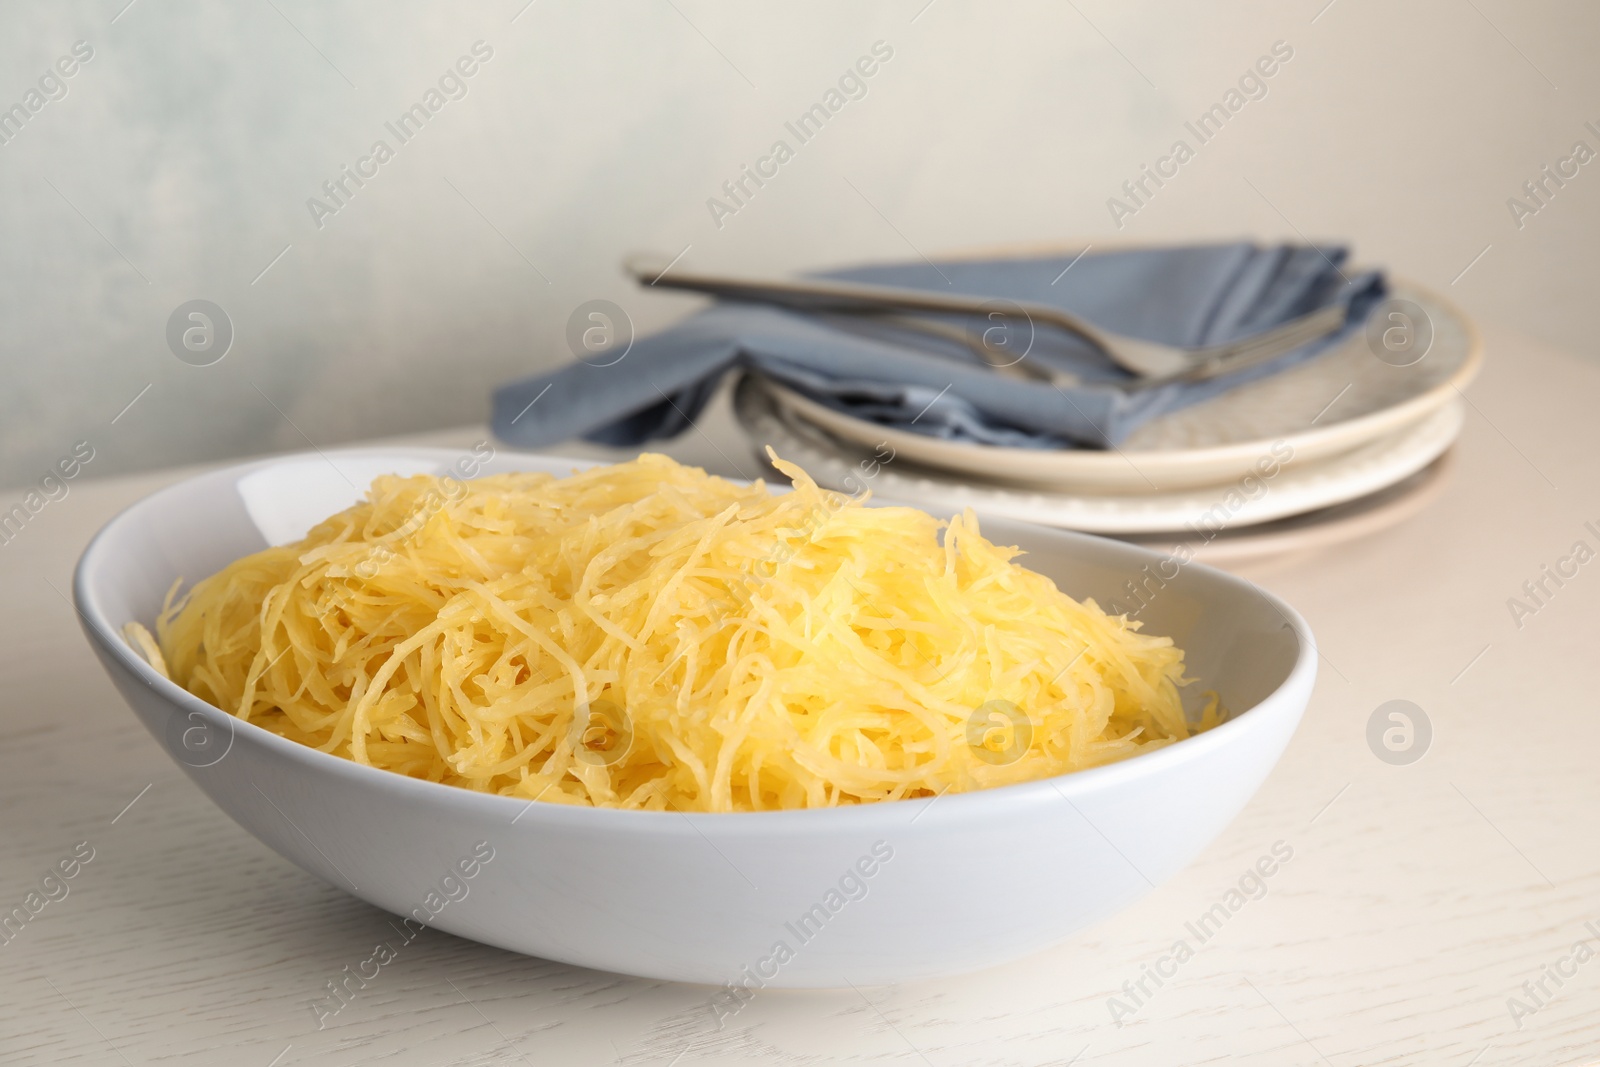 Photo of Cooked spaghetti squash in bowl on table